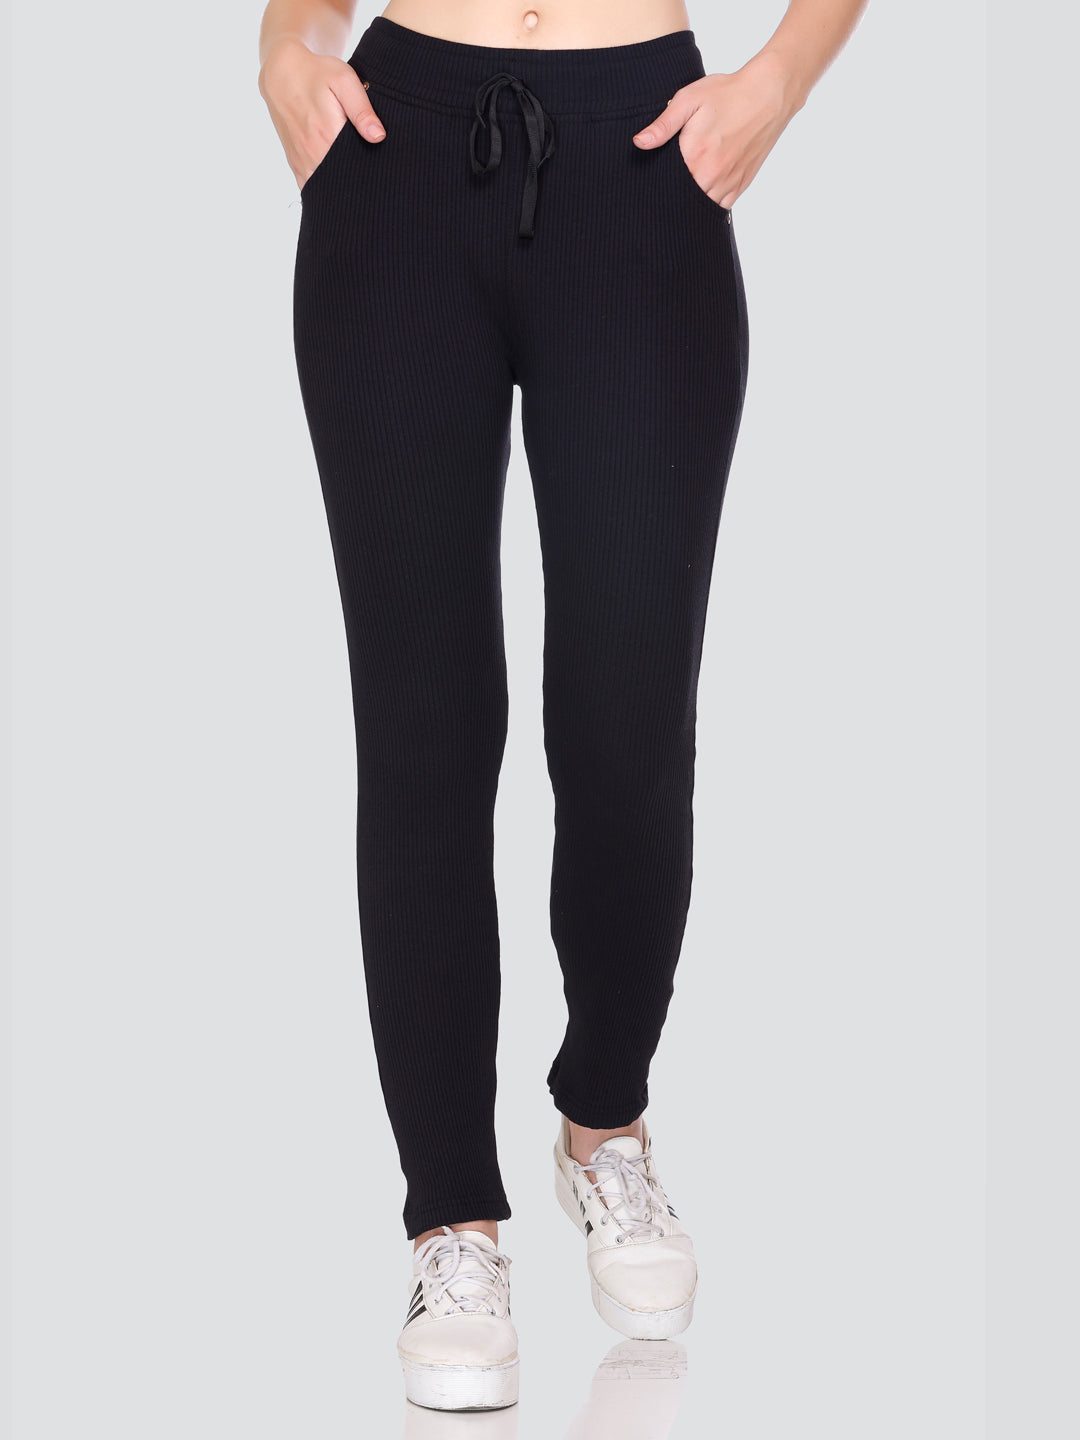 Buy Stylish Stretchable Track pants Combo For Women Online In